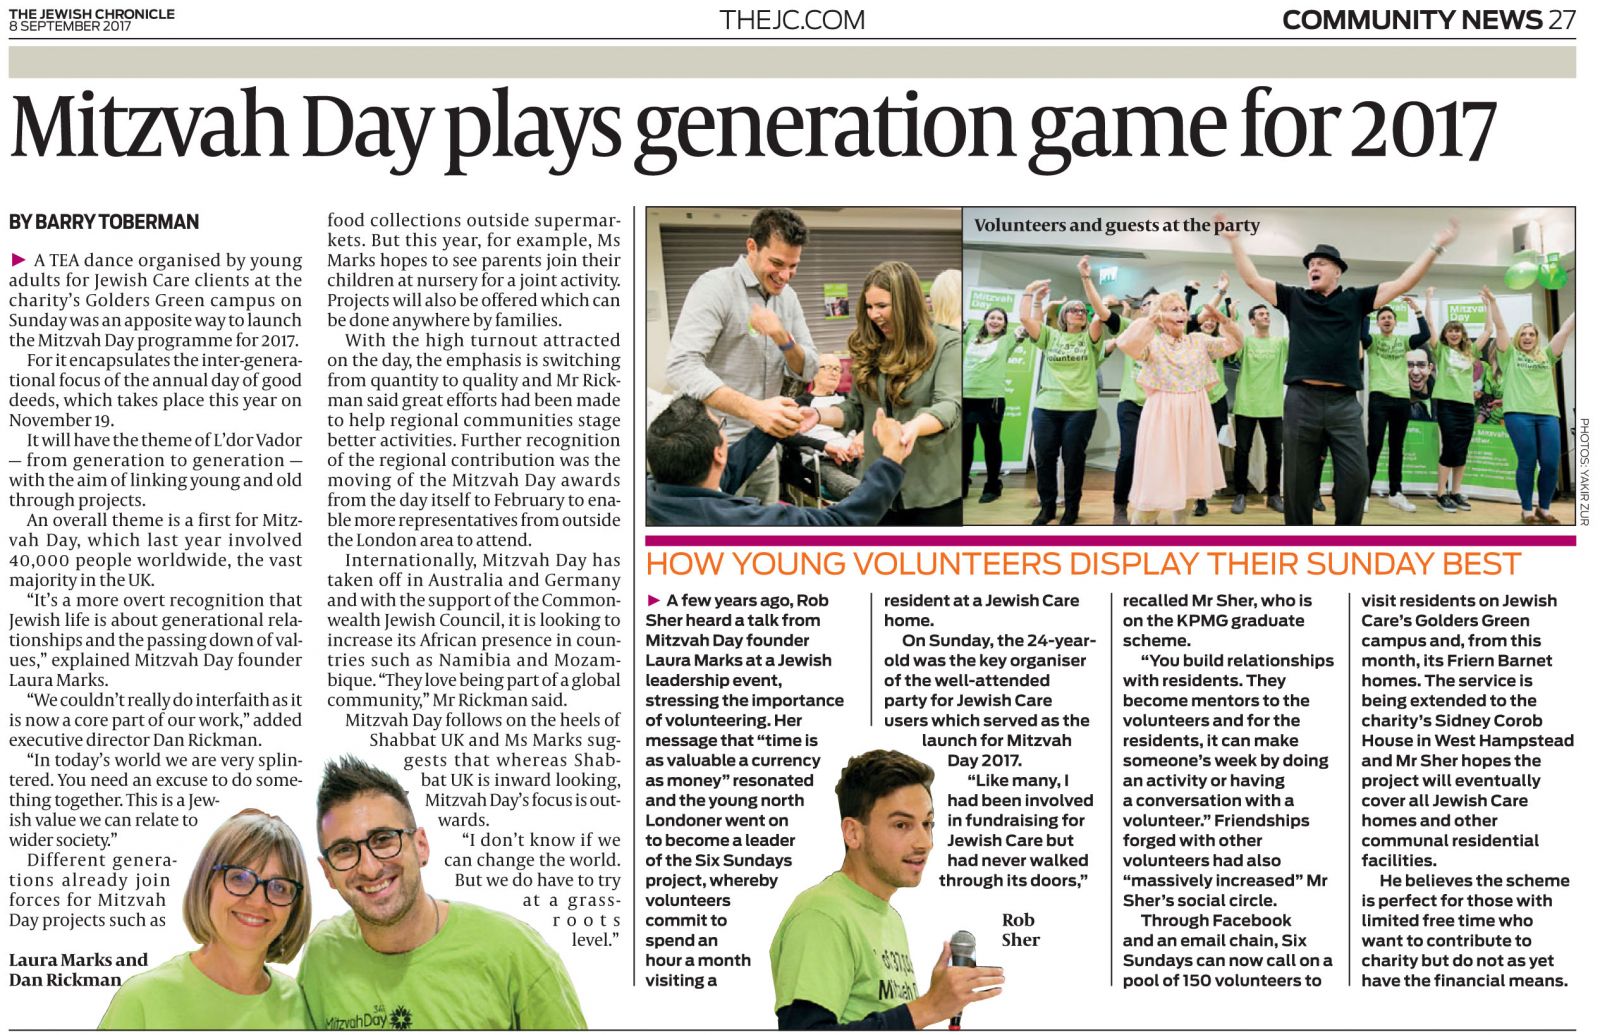 Mitzvah Day launch event in The Jewish Chronicle